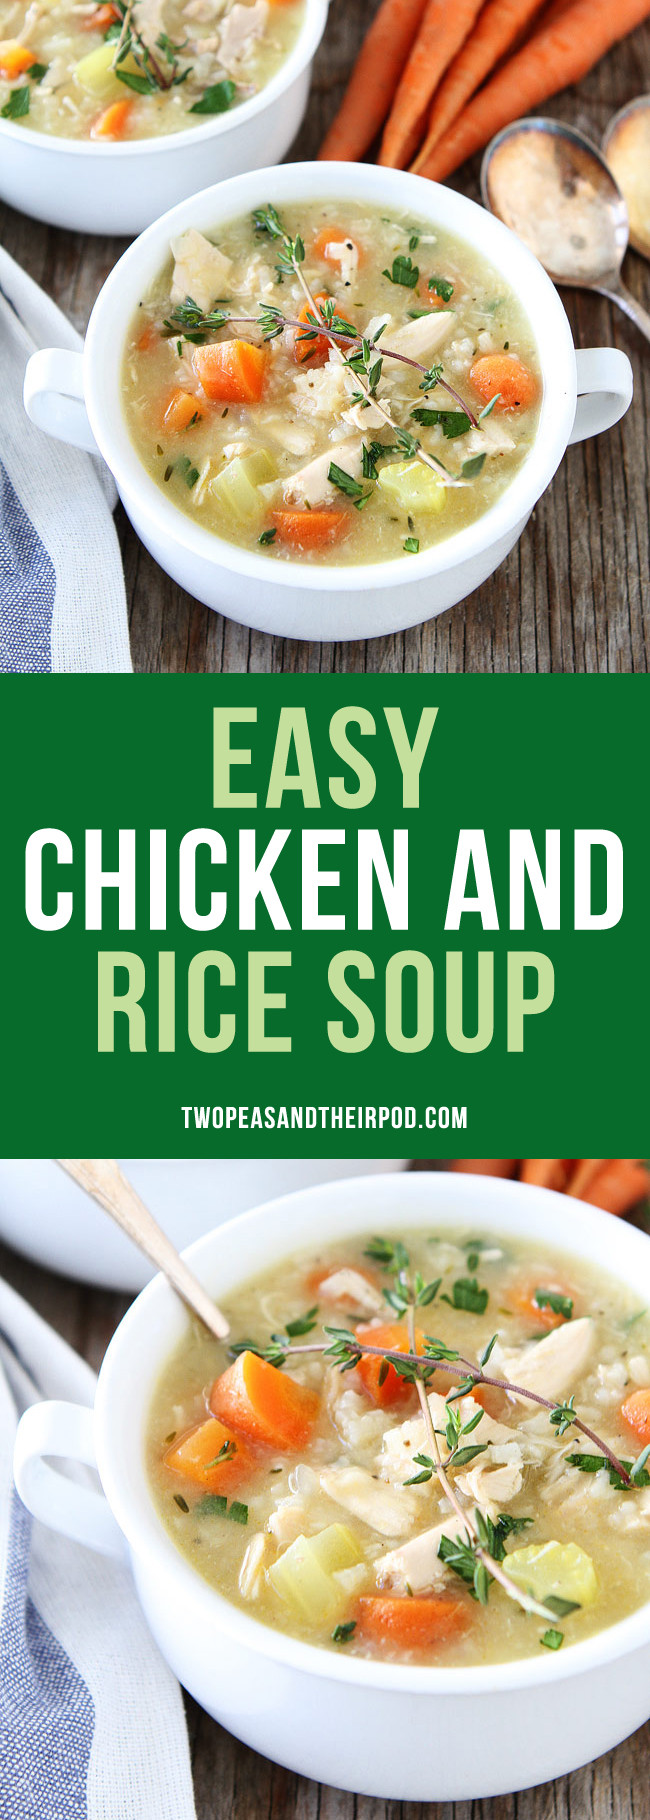 Easy Chicken And Rice Soup Recipe
 Easy Chicken and Rice Soup Recipe